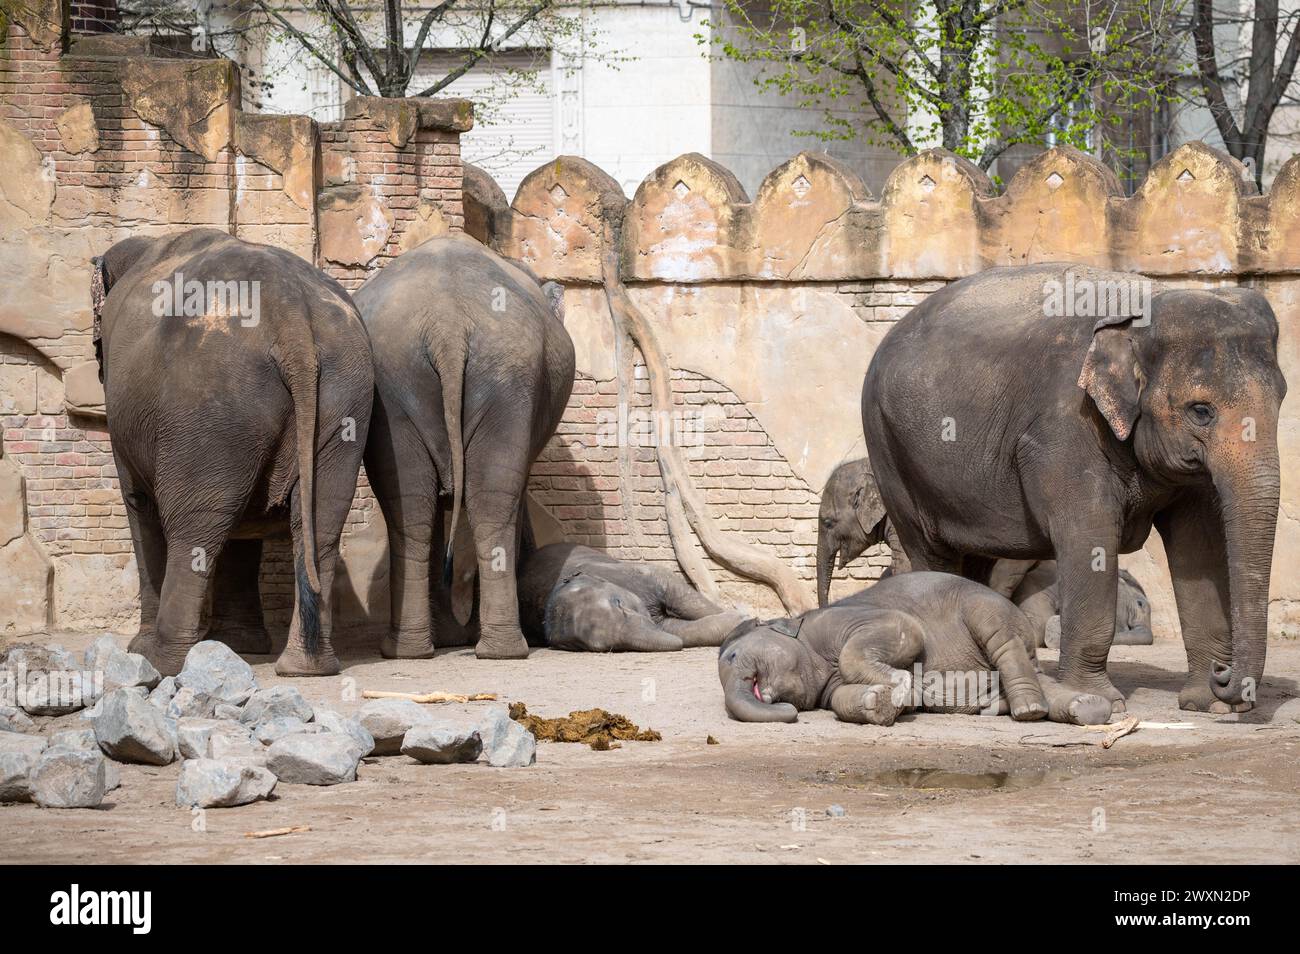 A group of elephants relaxing in a zoo enclosure Stock Photo